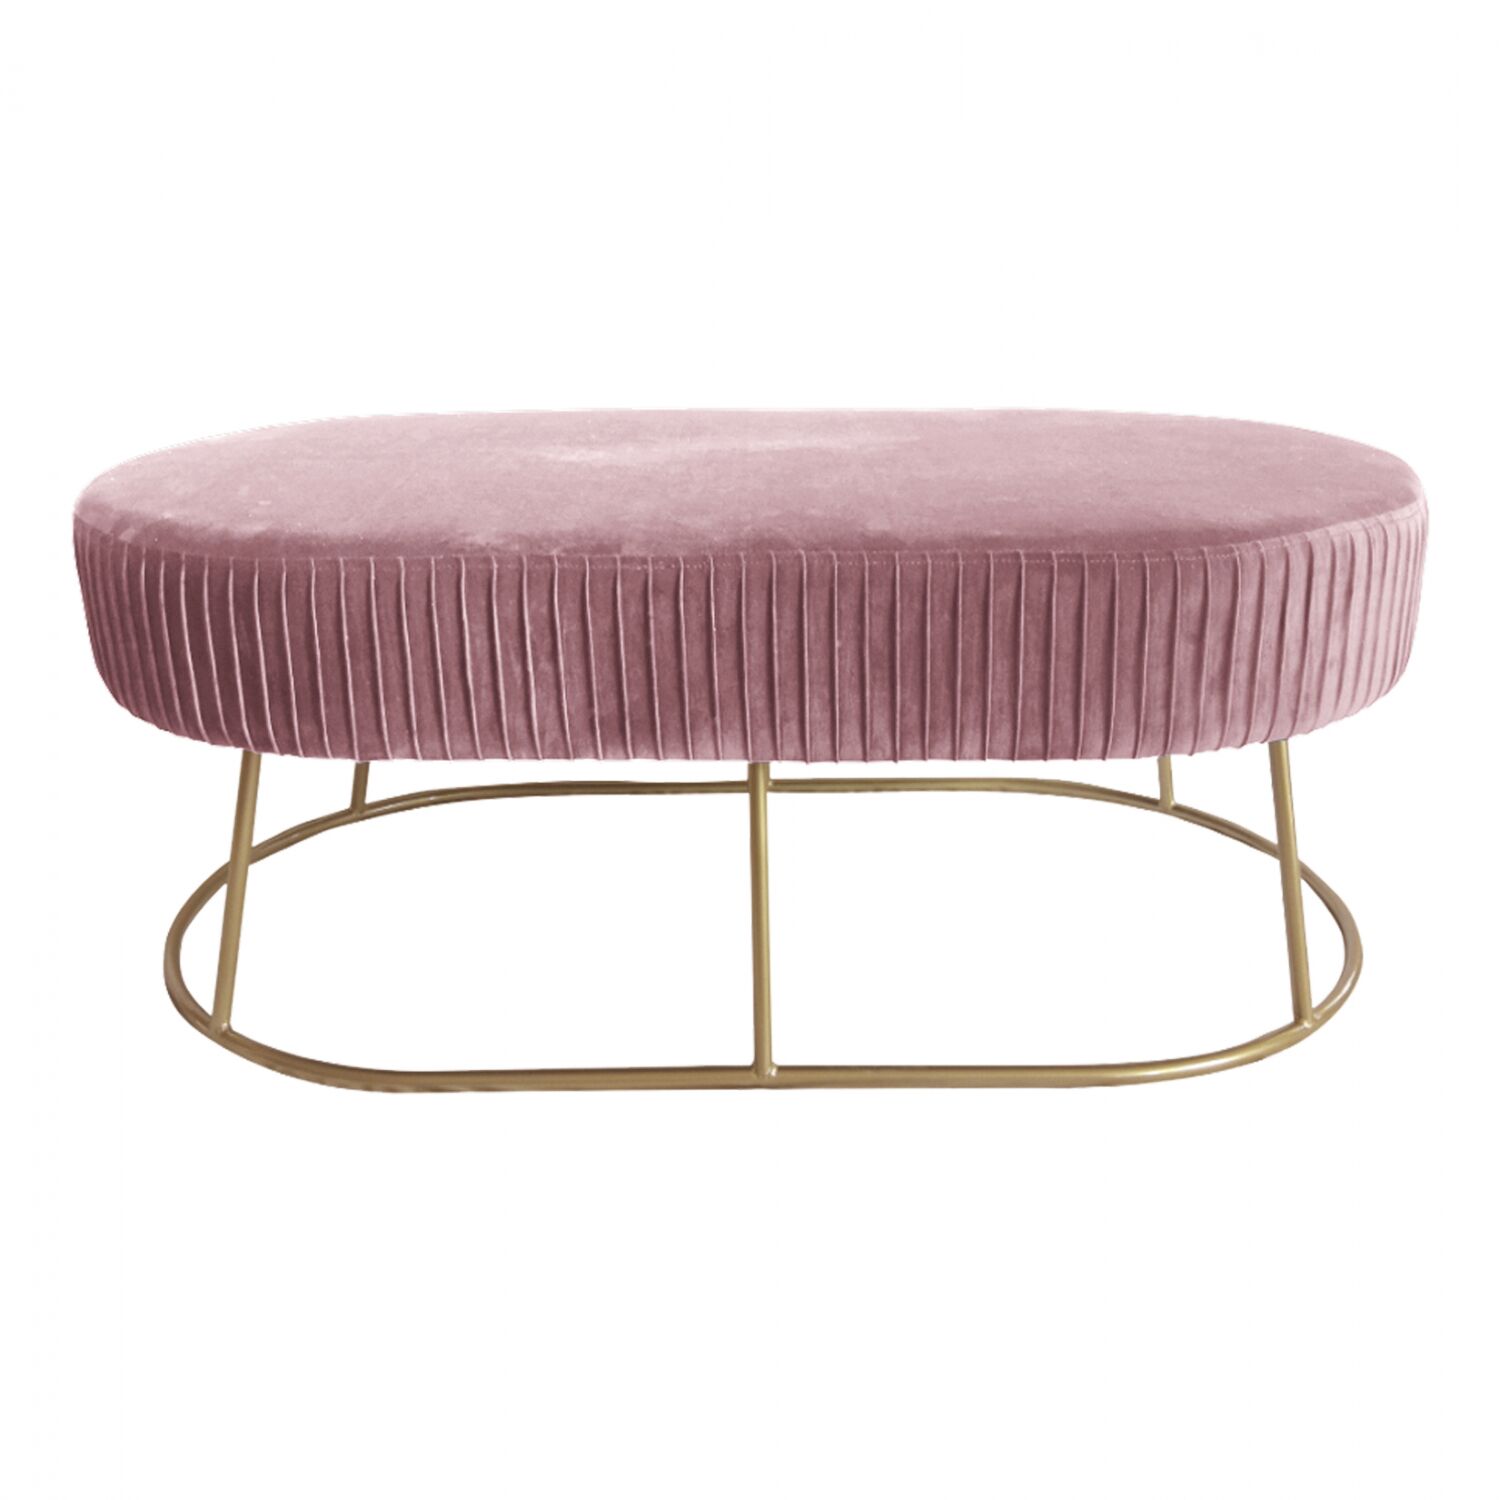 BENCH HM8635.02 MADE OF VELVET IN DUSTY PINK WITH GOLDEN BASE 118Χ66Χ42Y cm.